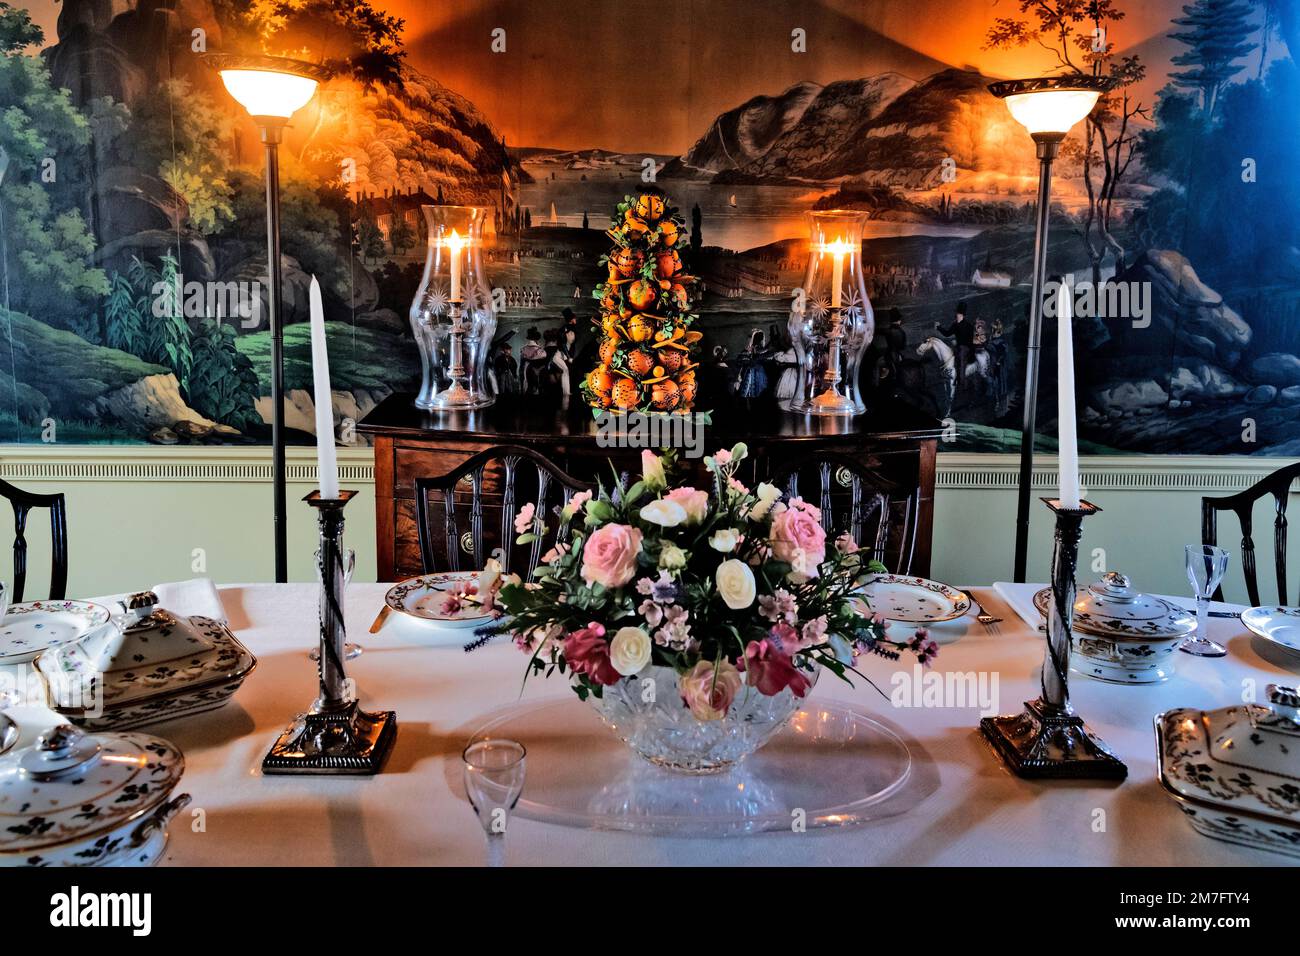 Served table. Dining room. Hagley Museum, Wilmington, Delaware, USA Stock Photo